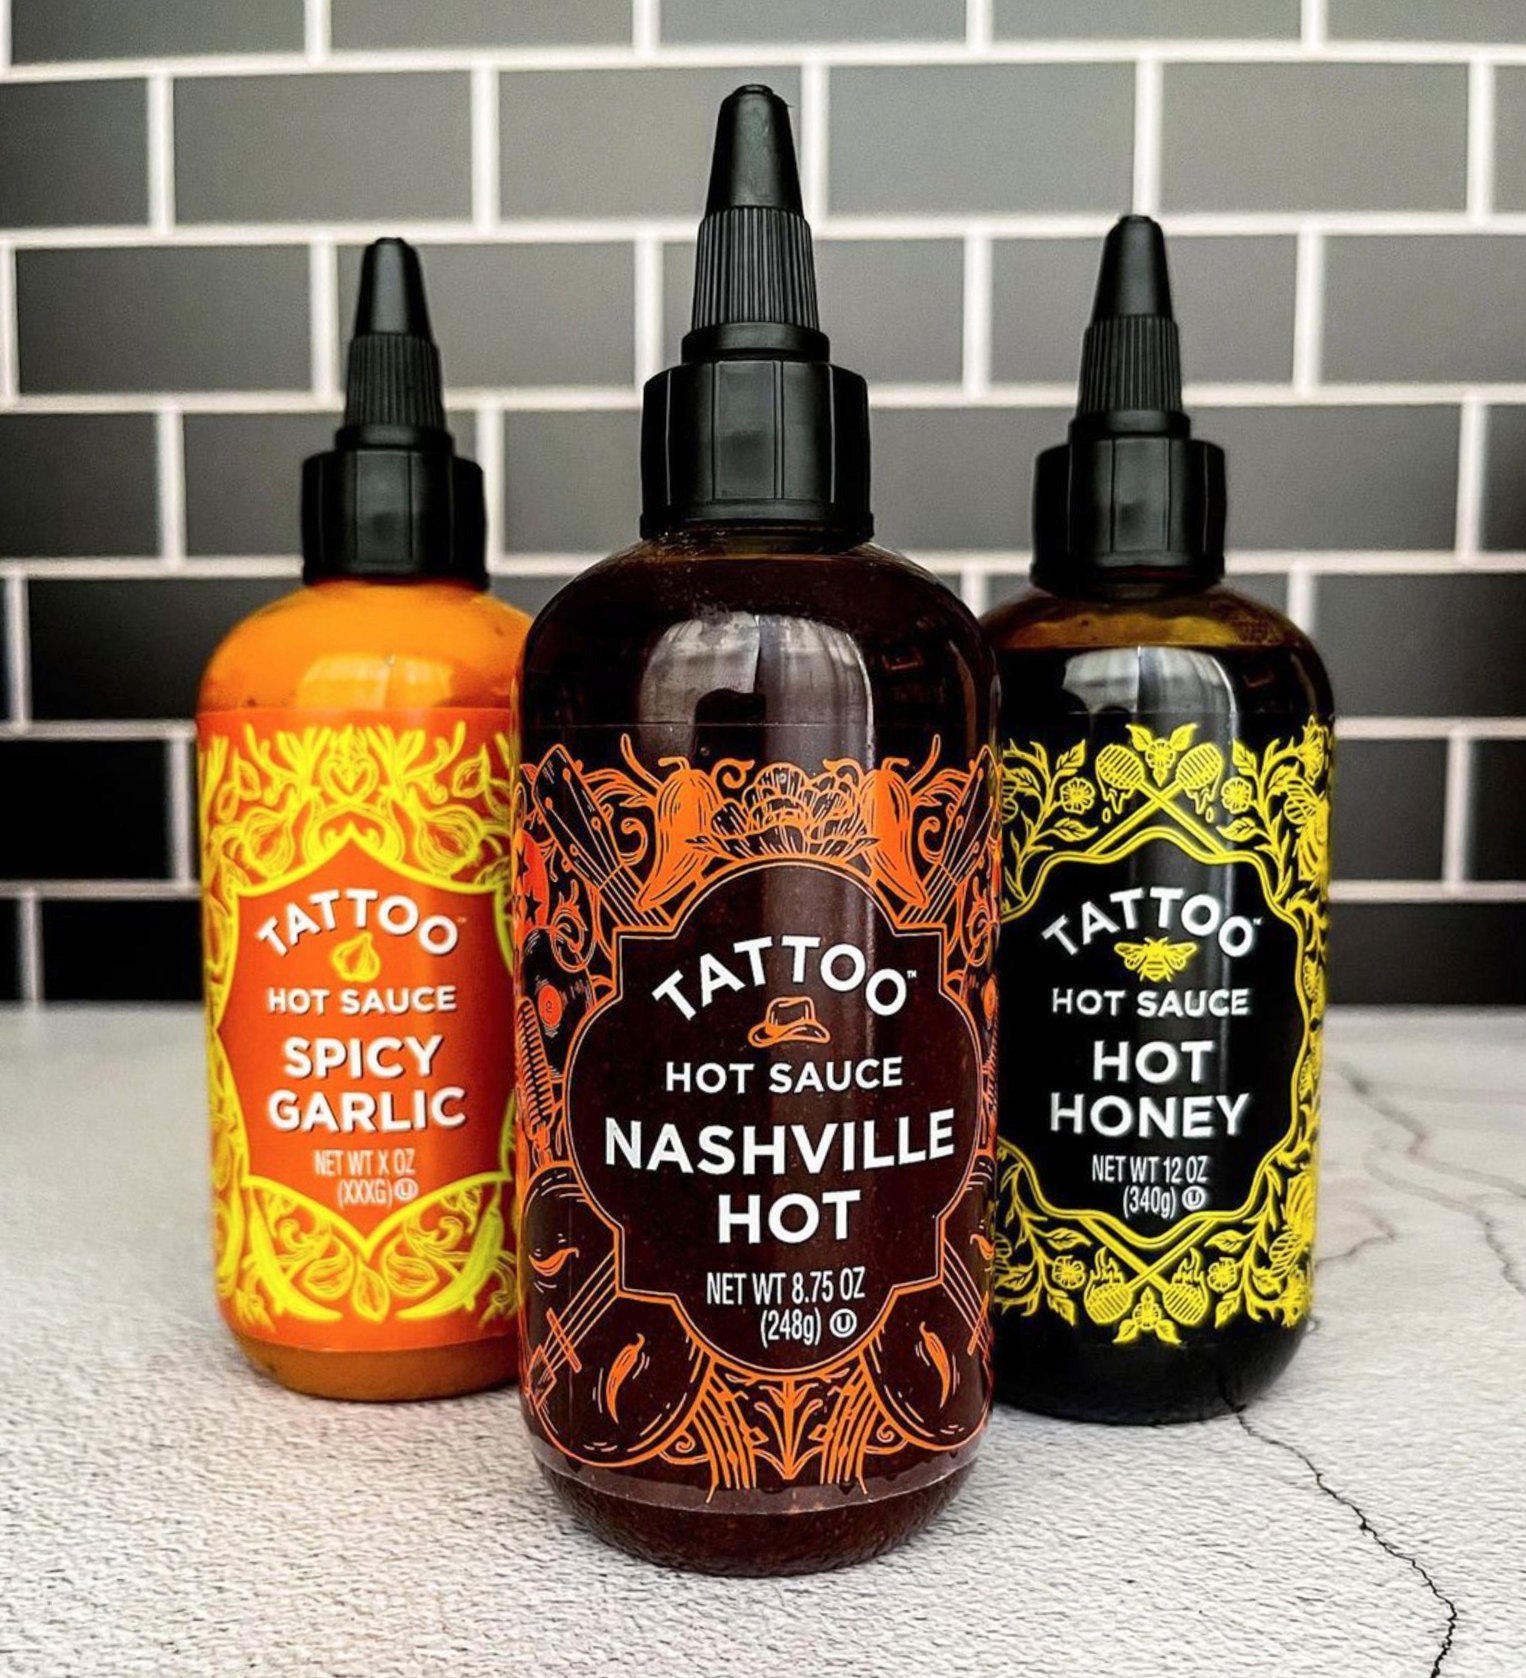 Tattoo Hot Sauces - YouTube